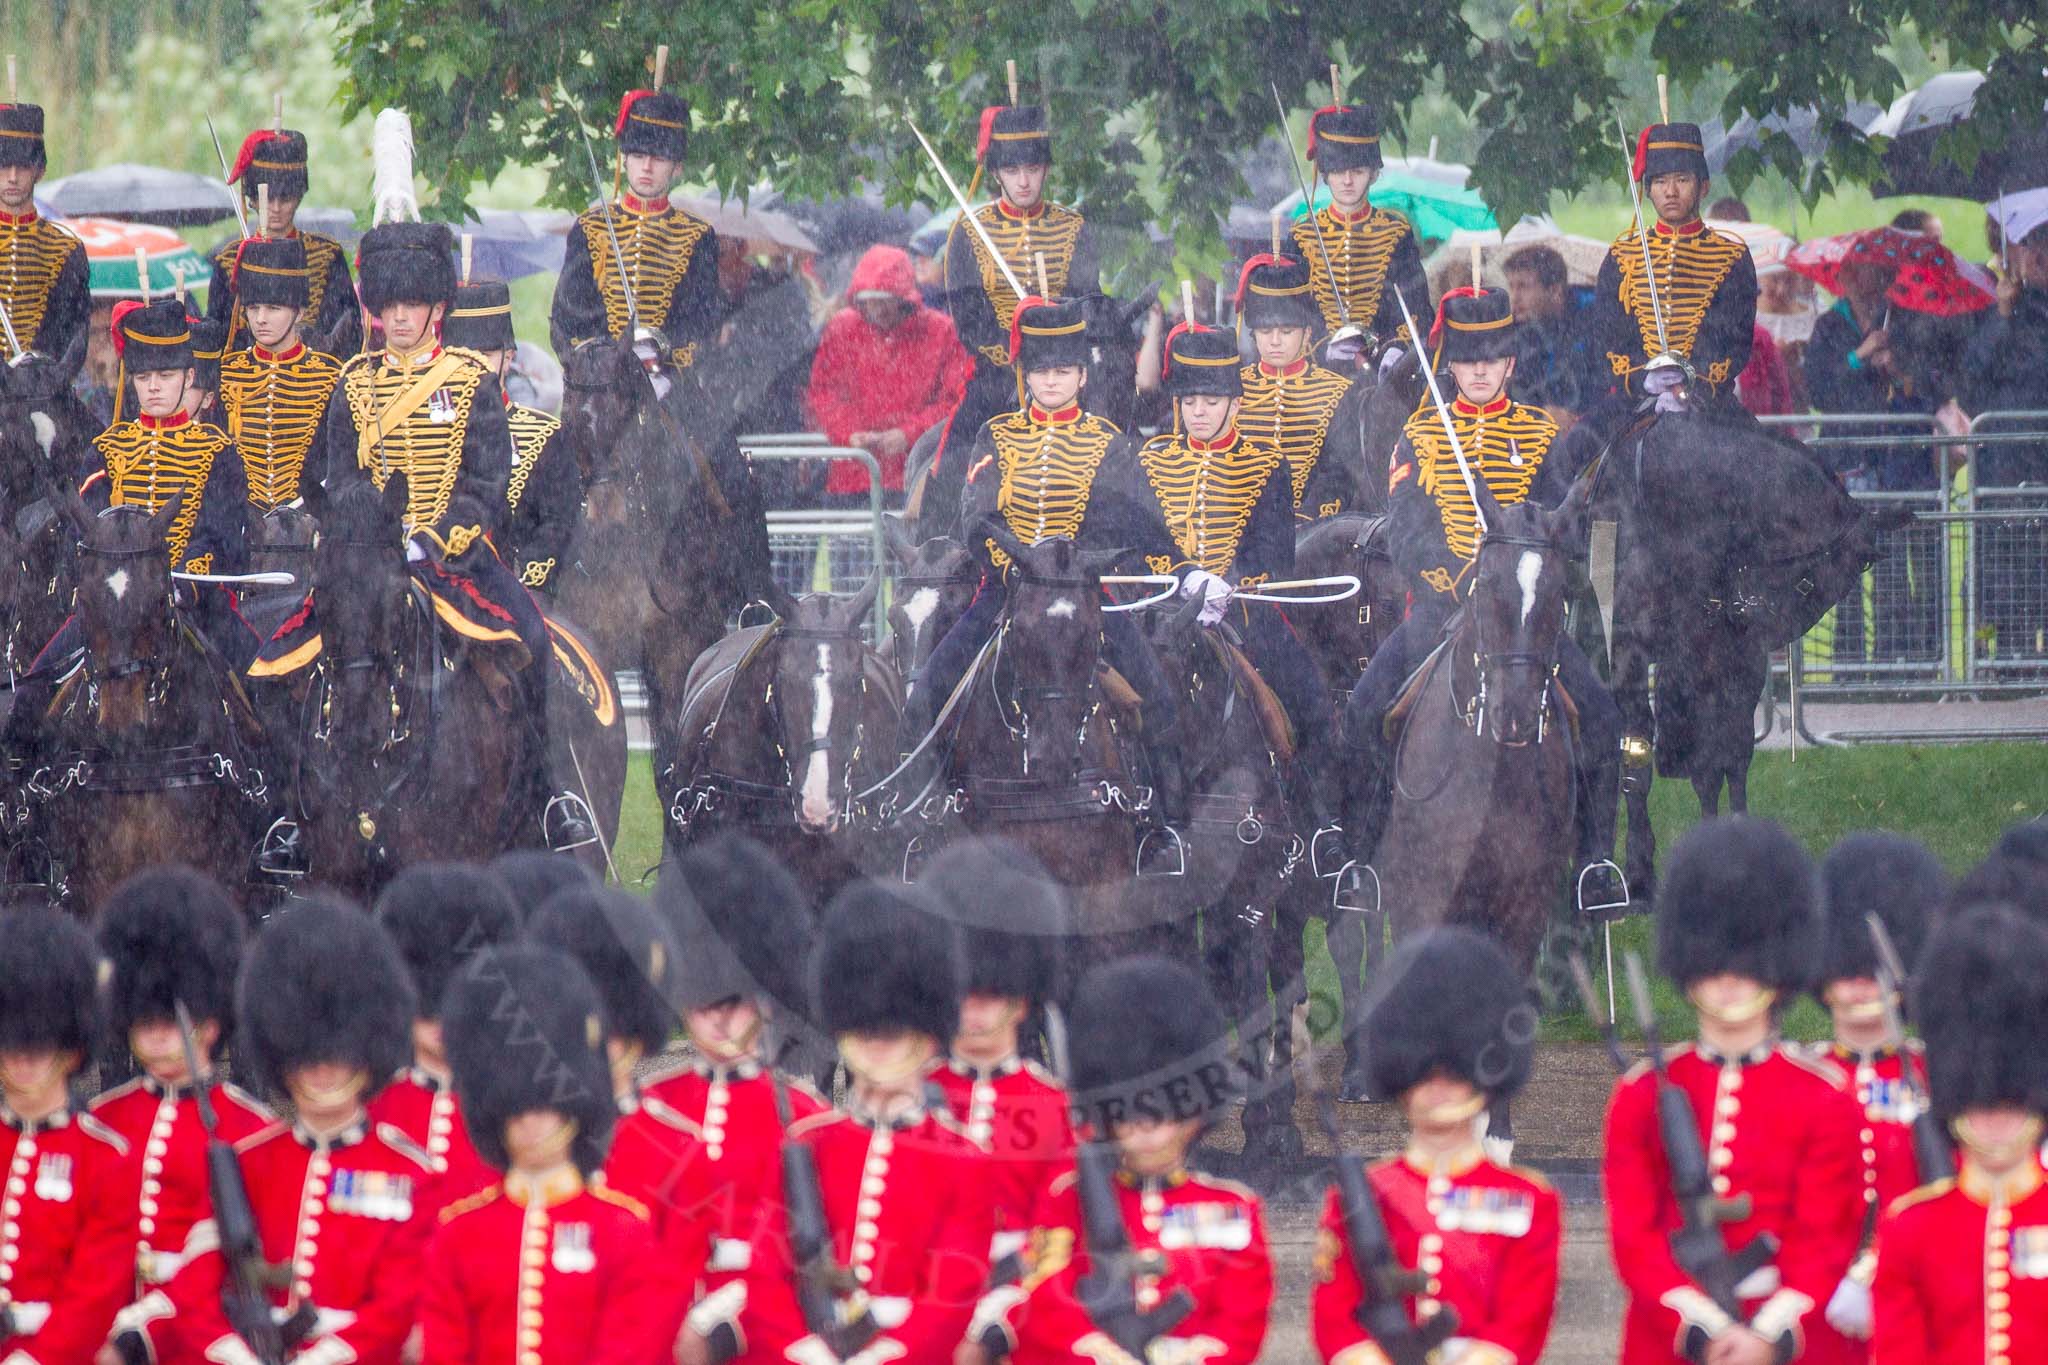 The Colonel's Review 2014.
Horse Guards Parade, Westminster,
London,

United Kingdom,
on 07 June 2014 at 10:44, image #178